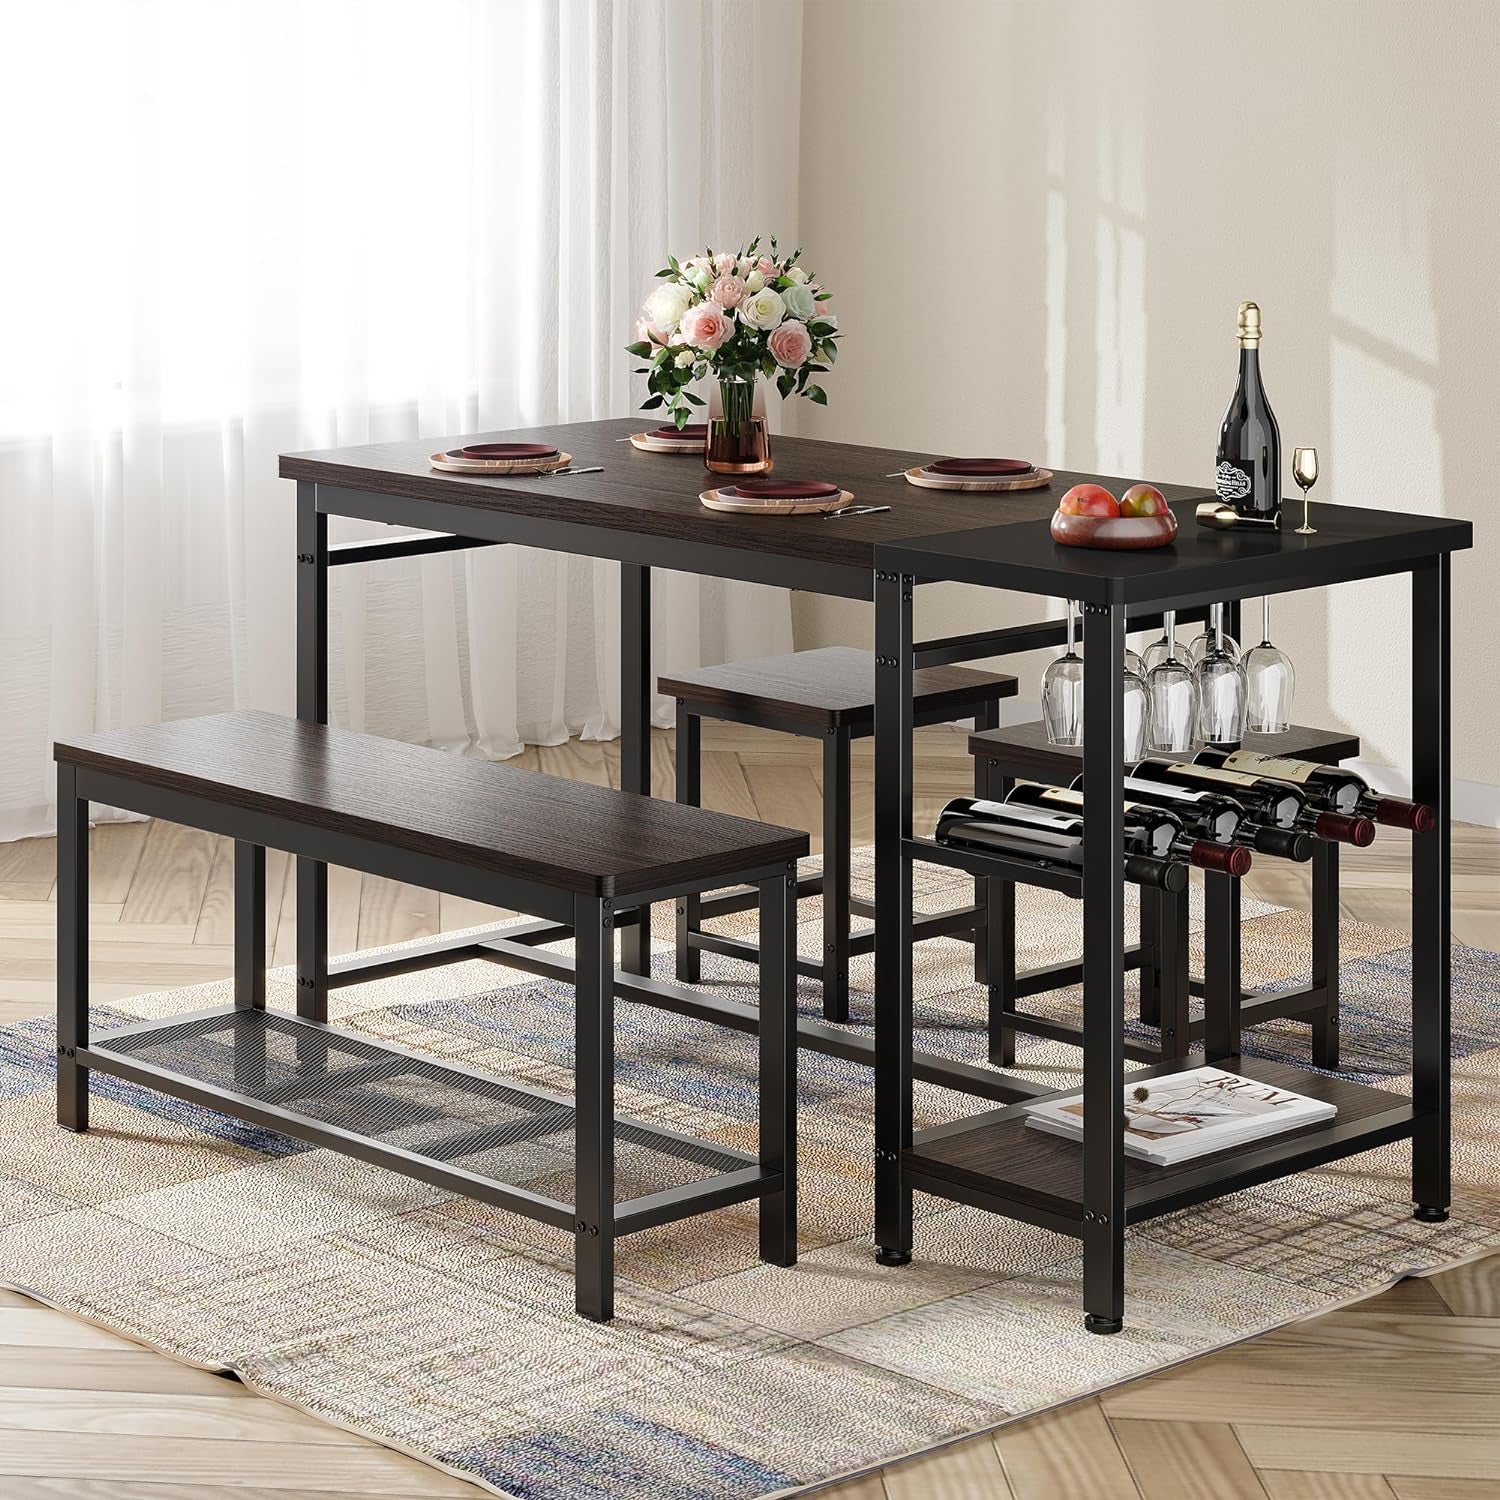 Dining Table Set for 4, Kitchen Table Set 4 Piece Dining Room Table Set with Wine Rack and Storage Shelf, Space-Saving Dinette Set for Small Space,Breakfast Nook, Espresso Brown